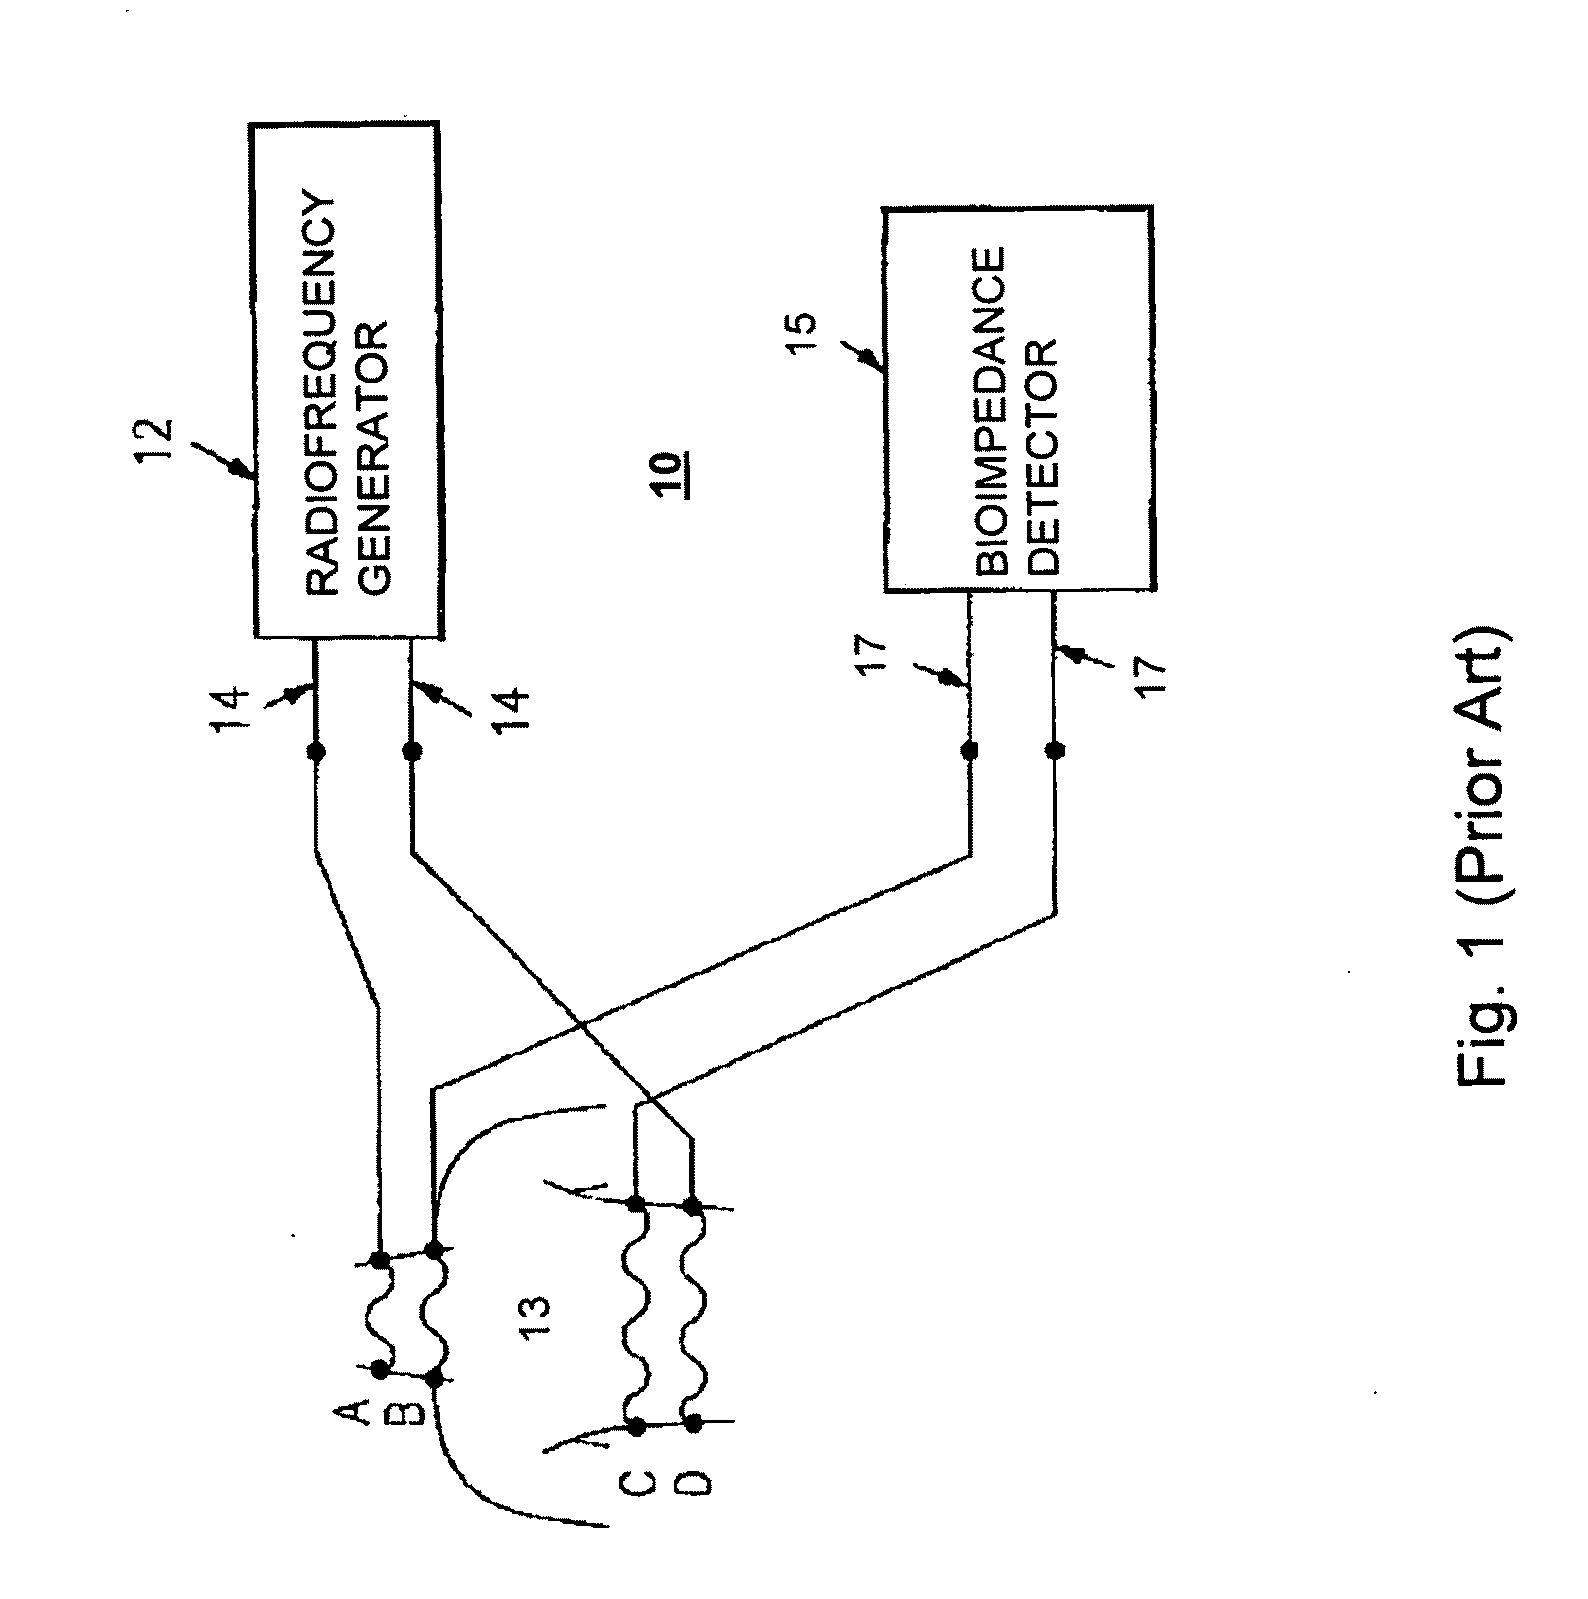 System, Method and Apparatus for Measuring Blood Flow and Blood Volume